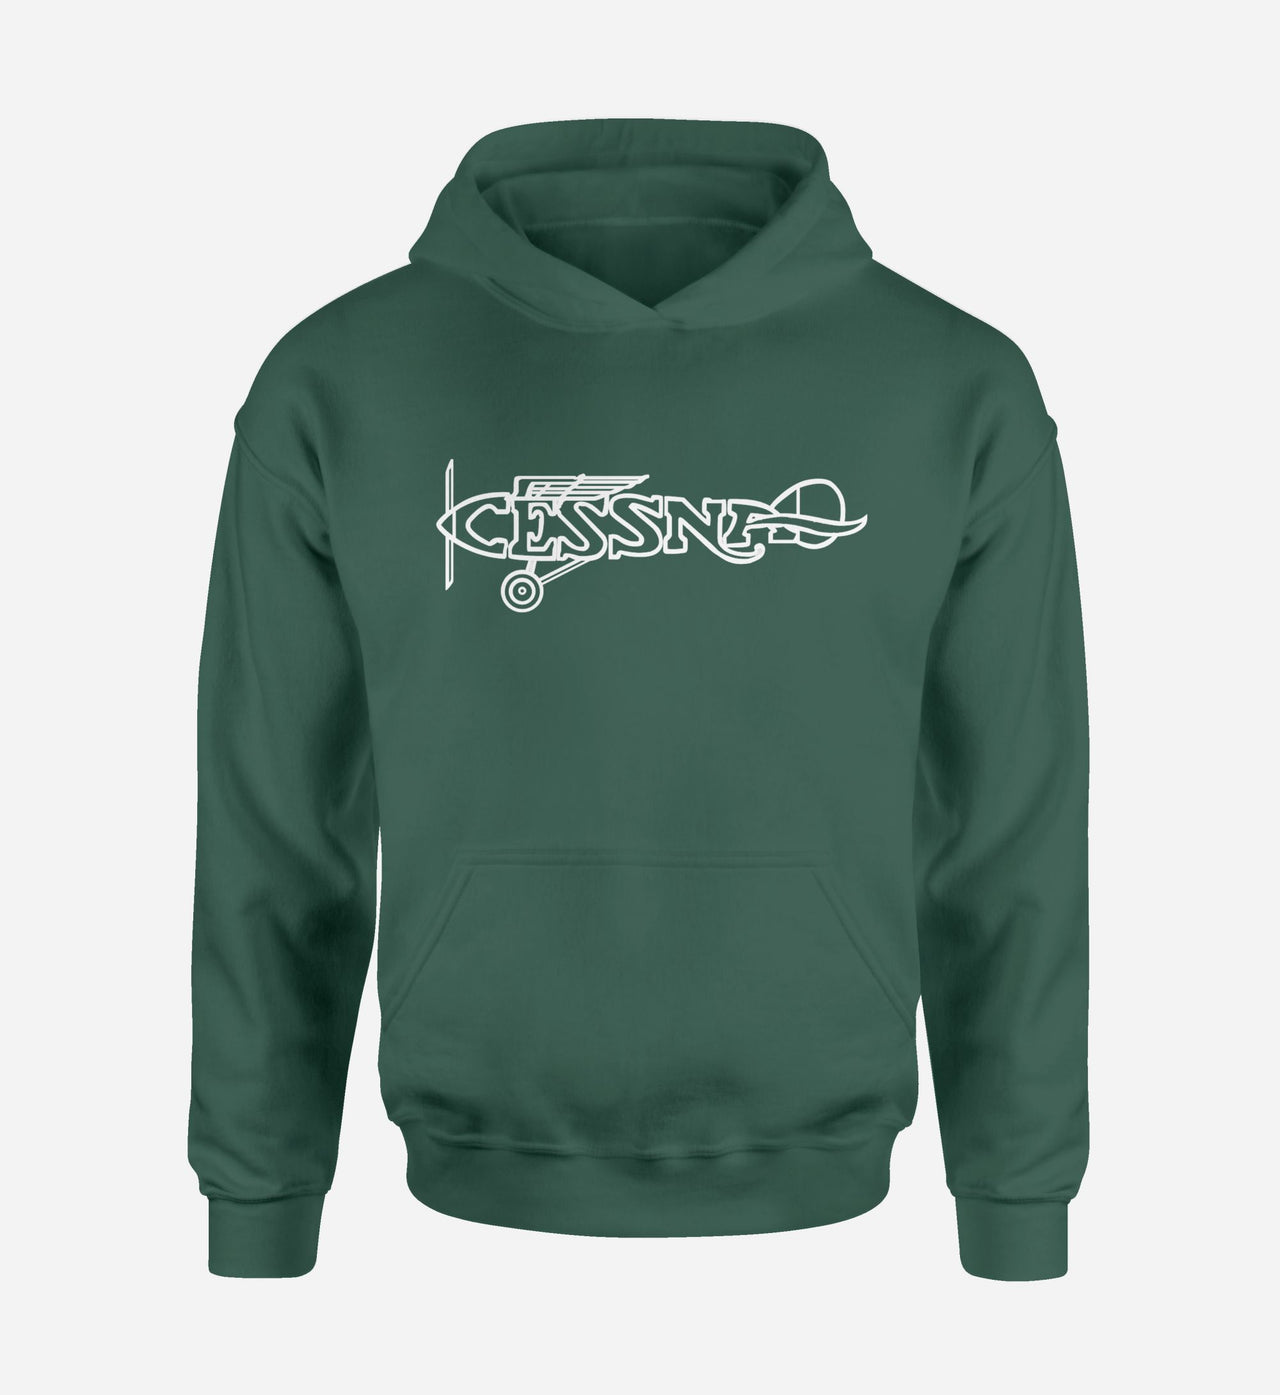 Special Cessna Text Designed Hoodies